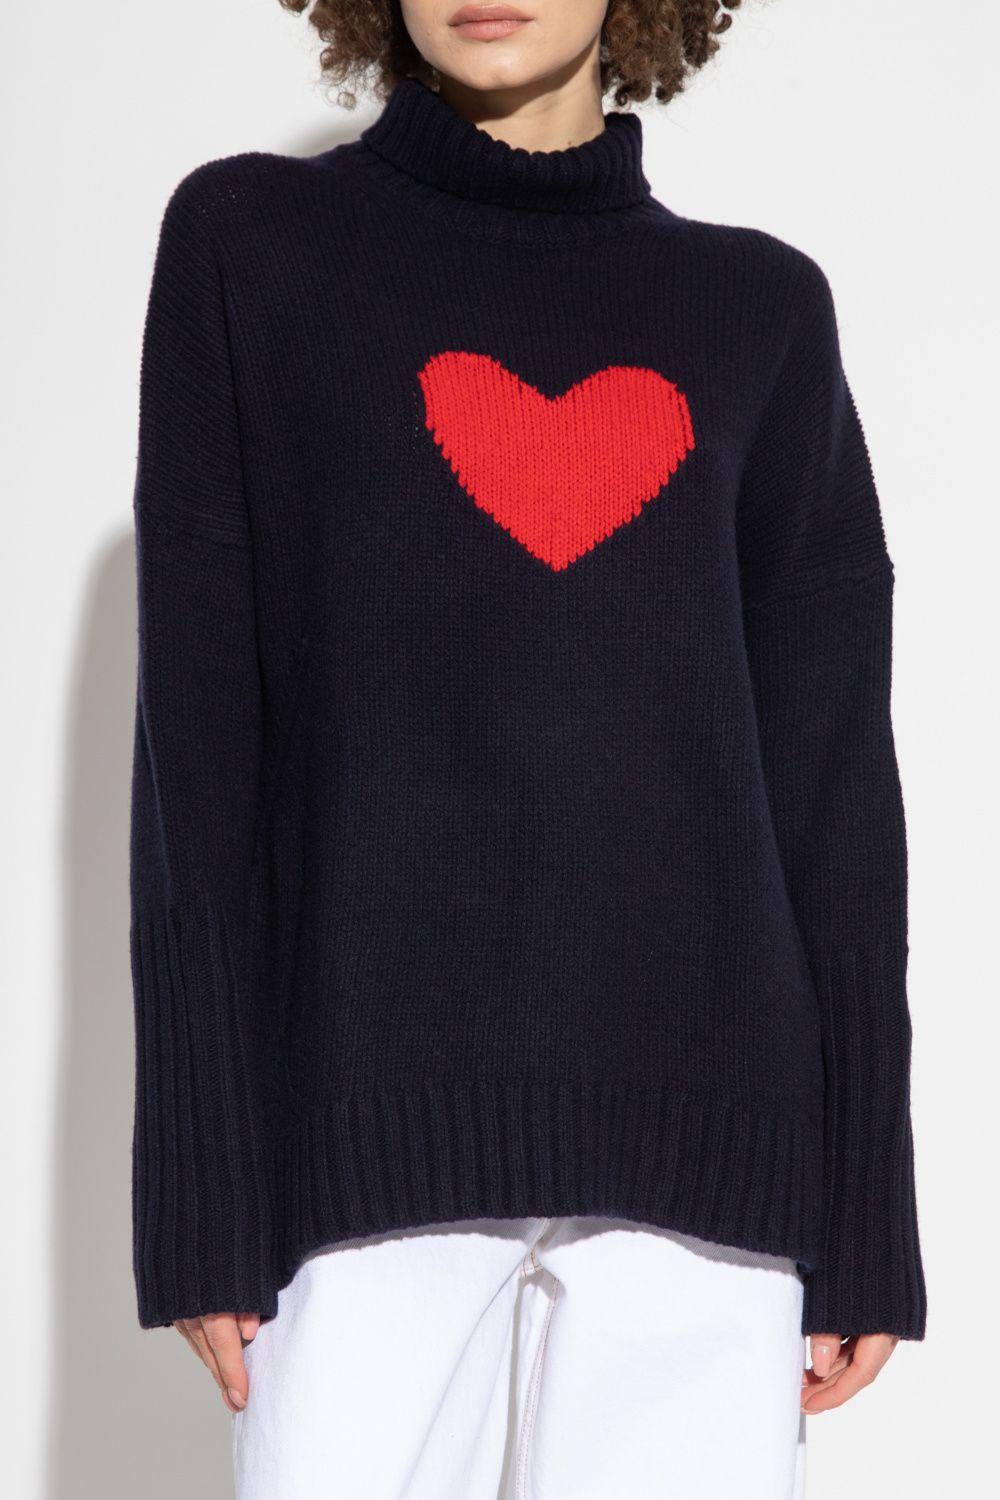 Zadig & Voltaire Alma Heart Sweater in Blue | Lyst